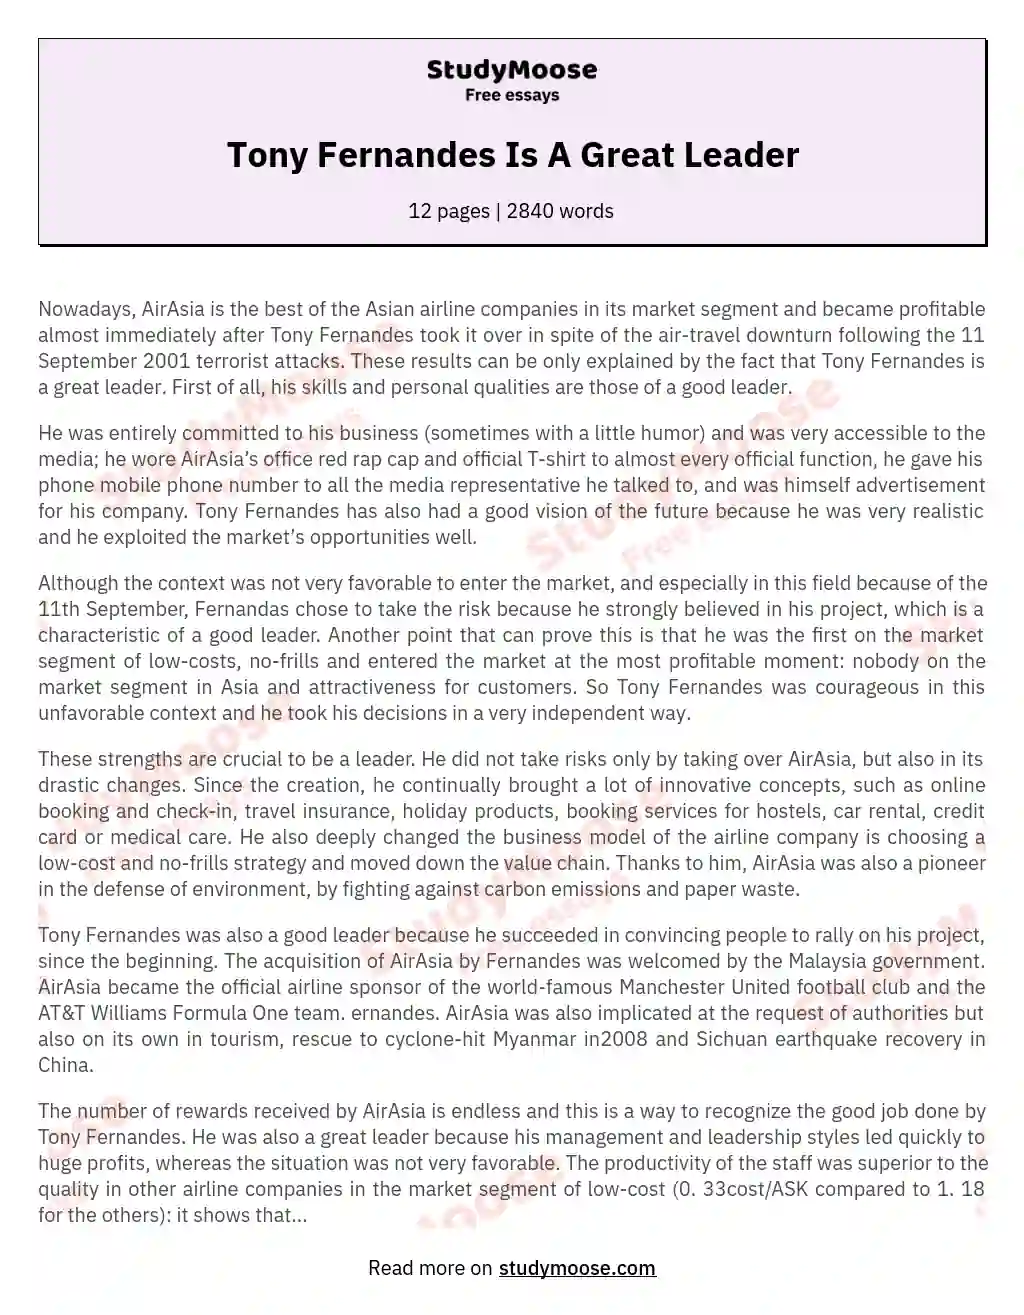 Tony Fernandes Is A Great Leader essay